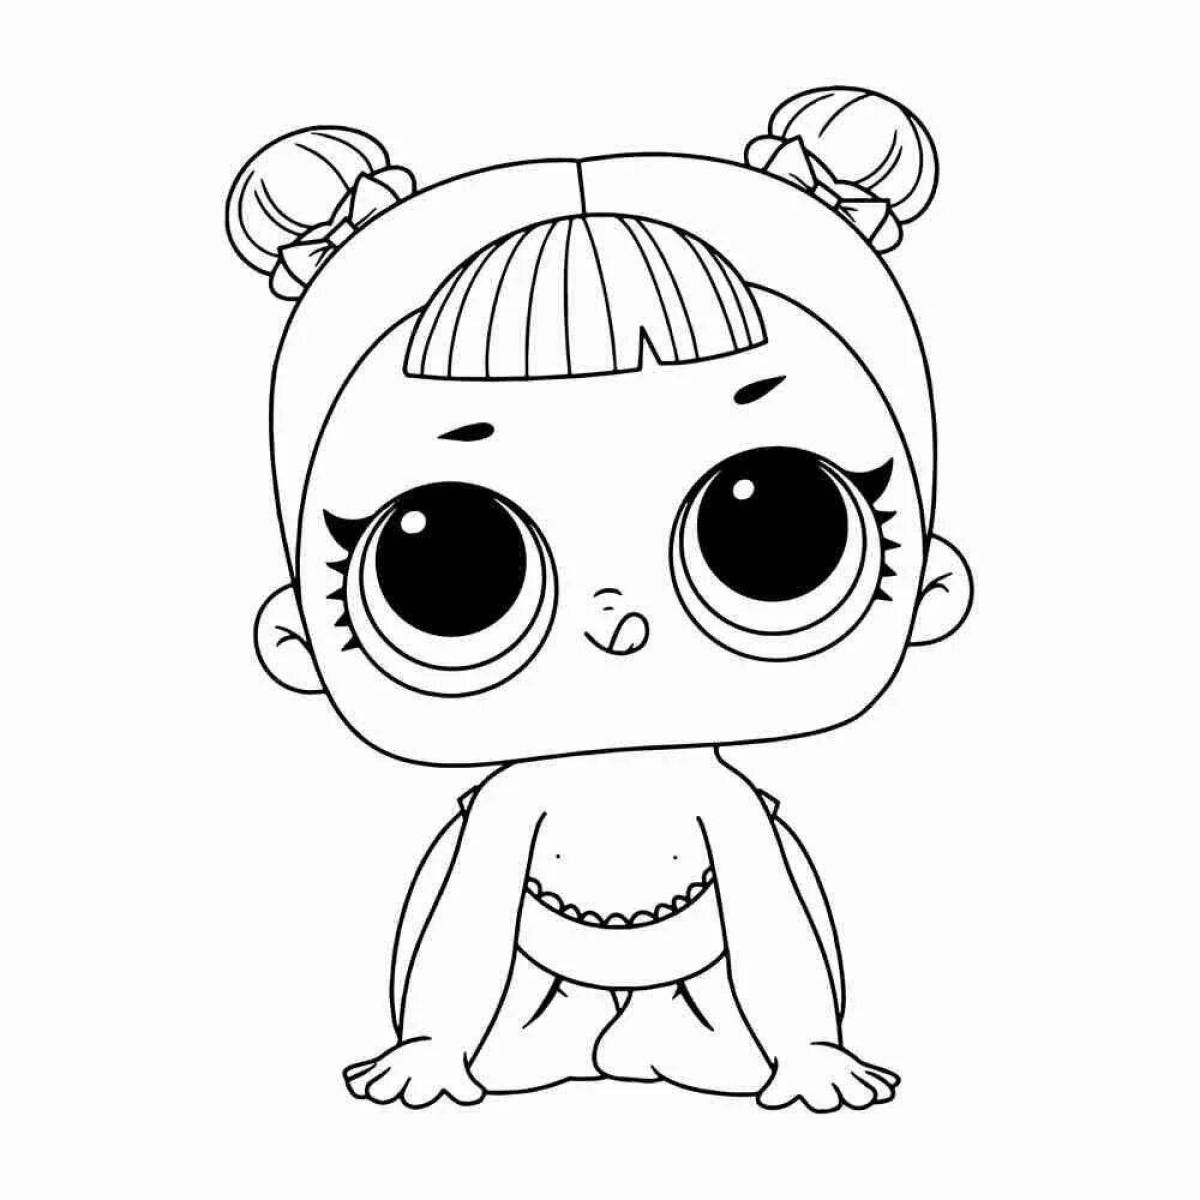 Exquisite doll lol little sisters coloring page